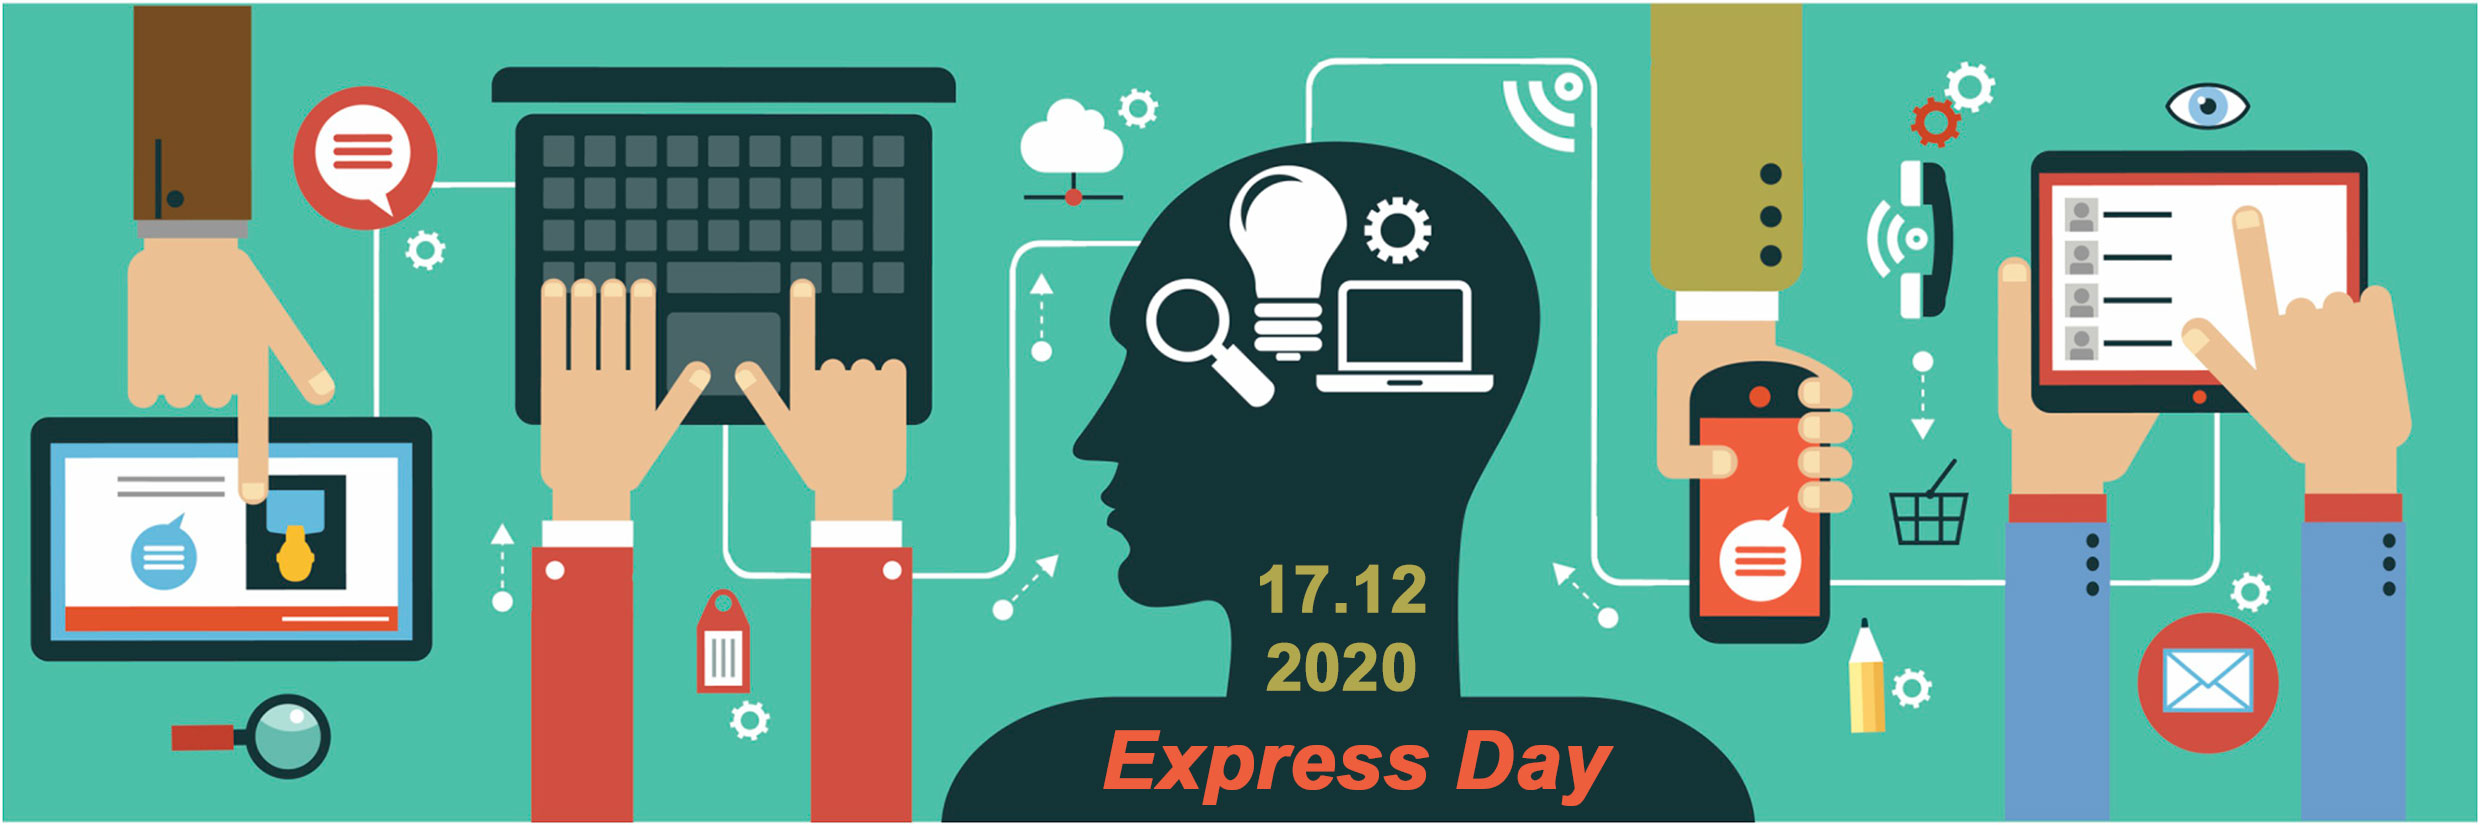 Express day 201217